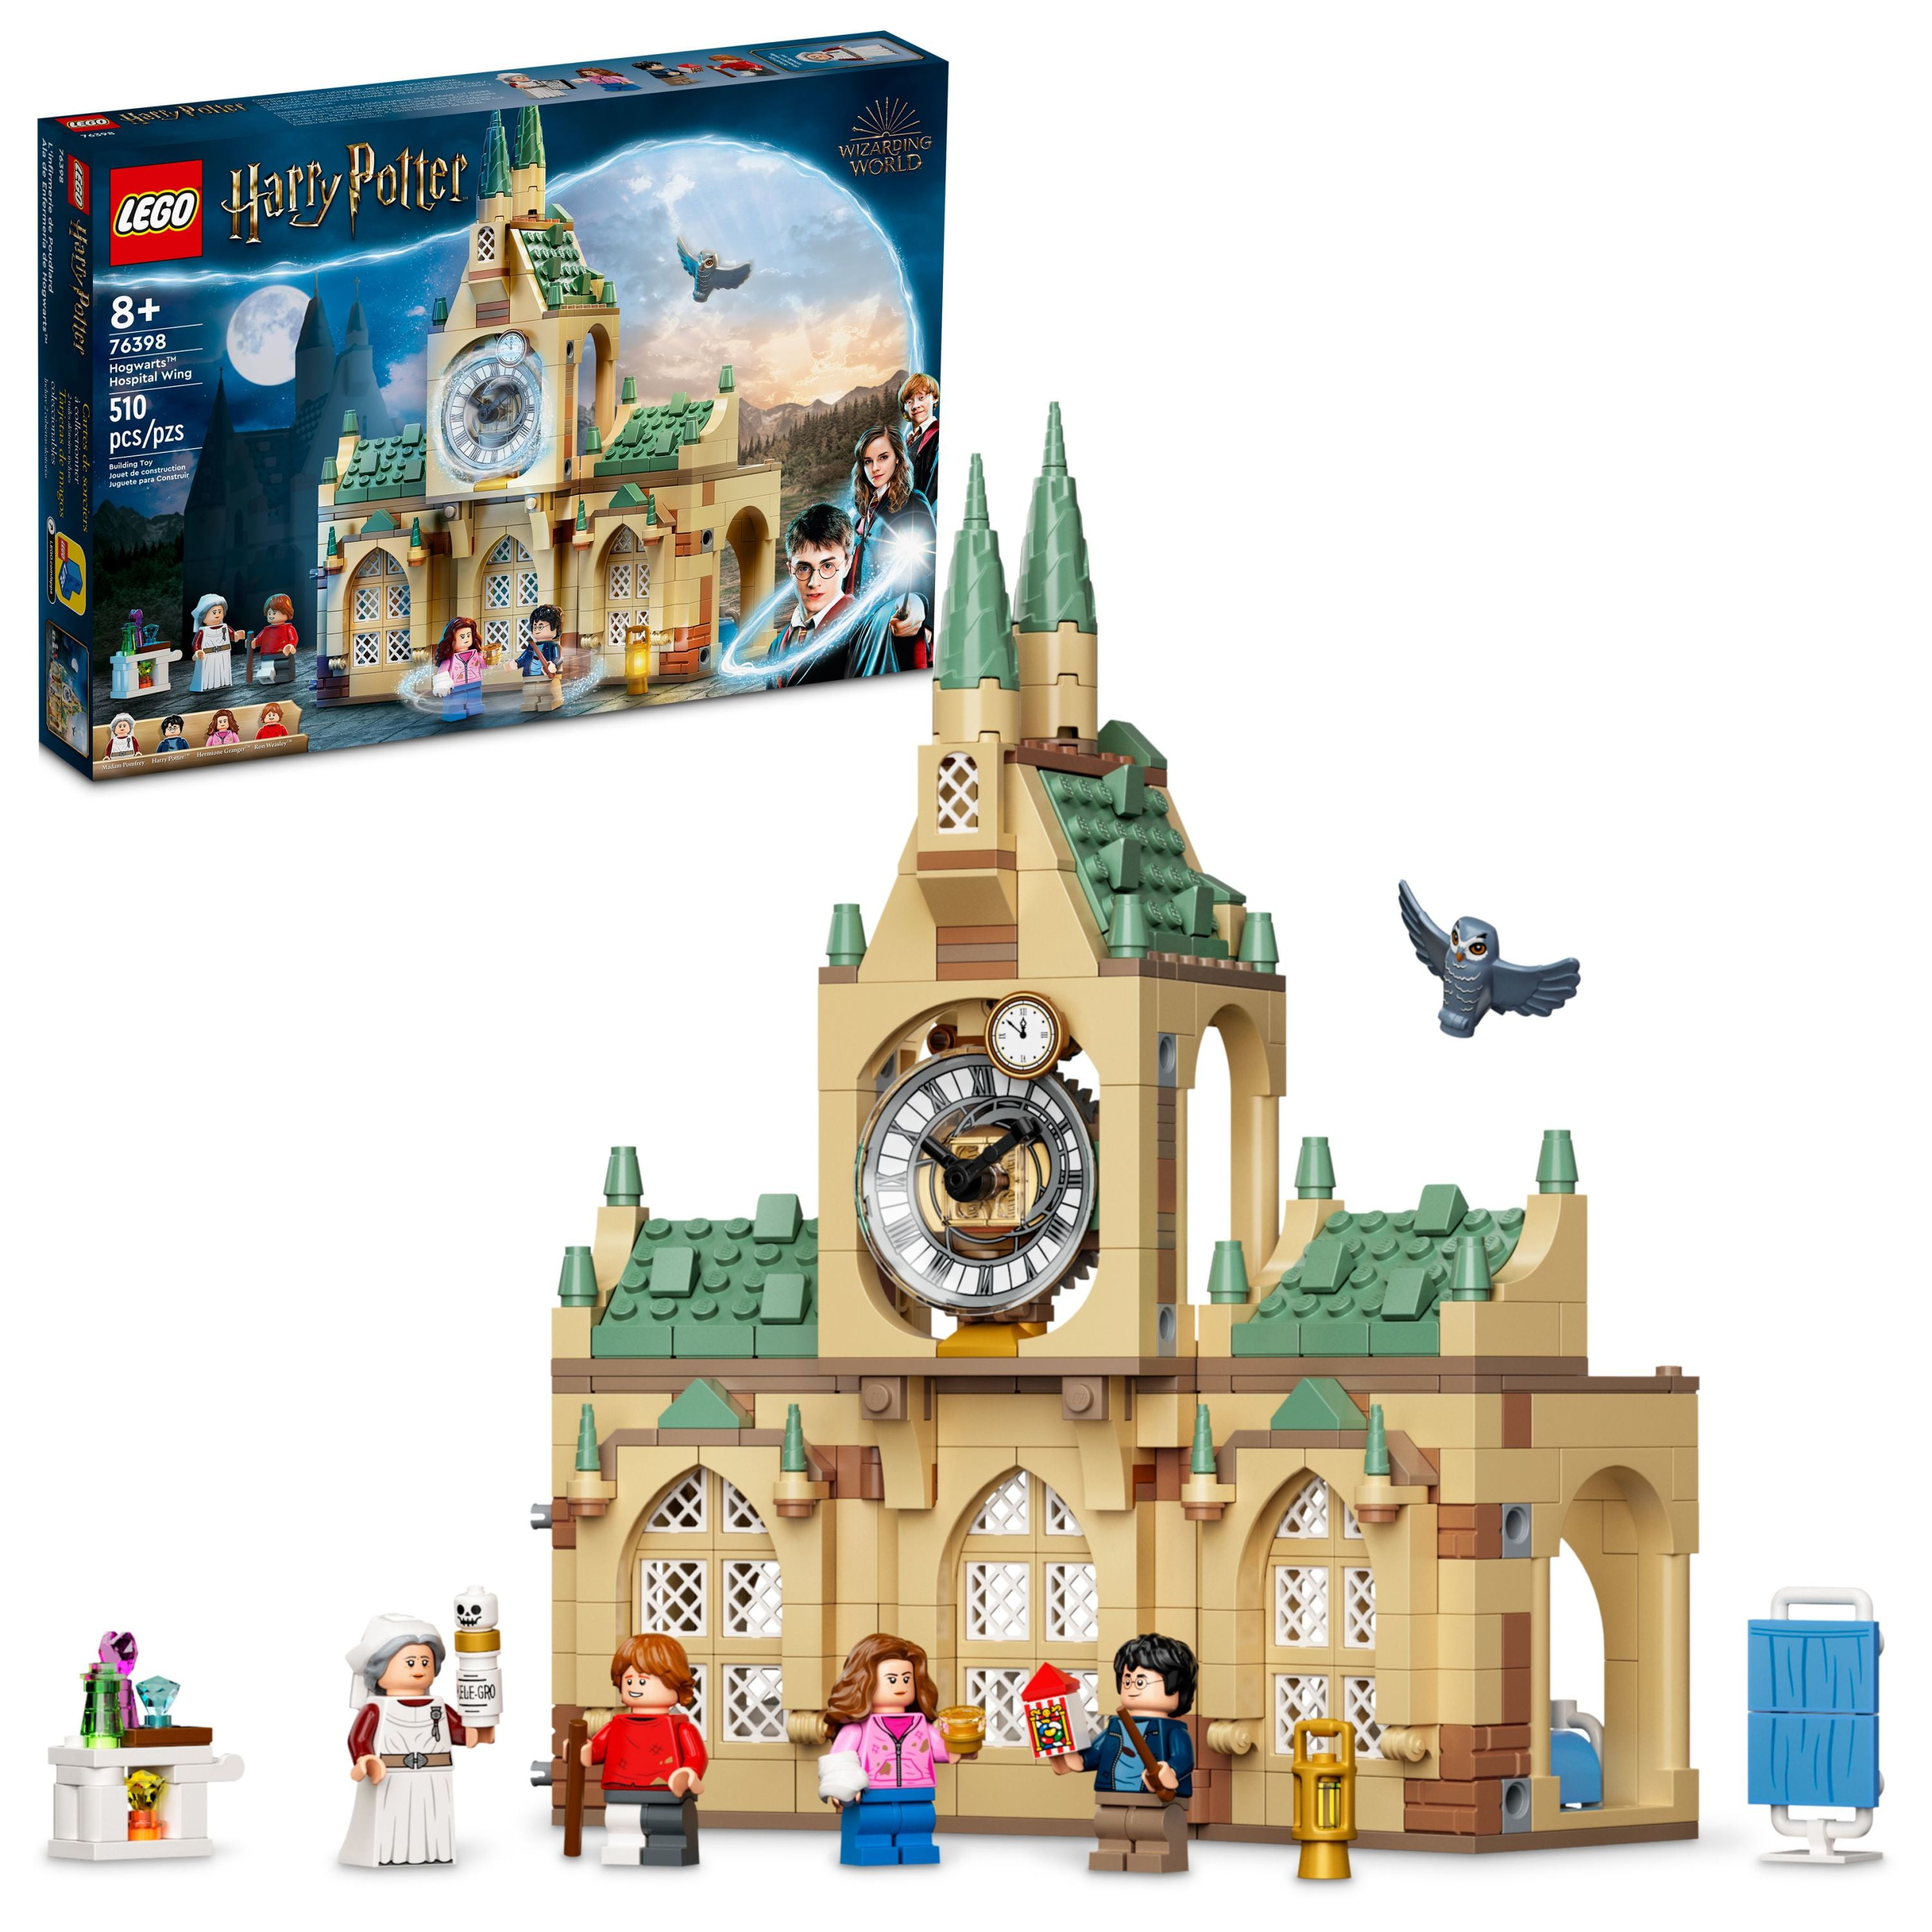 LEGO Harry Potter Hogwarts Hospital Wing 76398 Buildable Castle Toy with Clock Tower, The Prisoner of Azkaban, Includes Harry Potter, Hermione Granger, Ron Weasley & Madam Pomfrey Minifigures